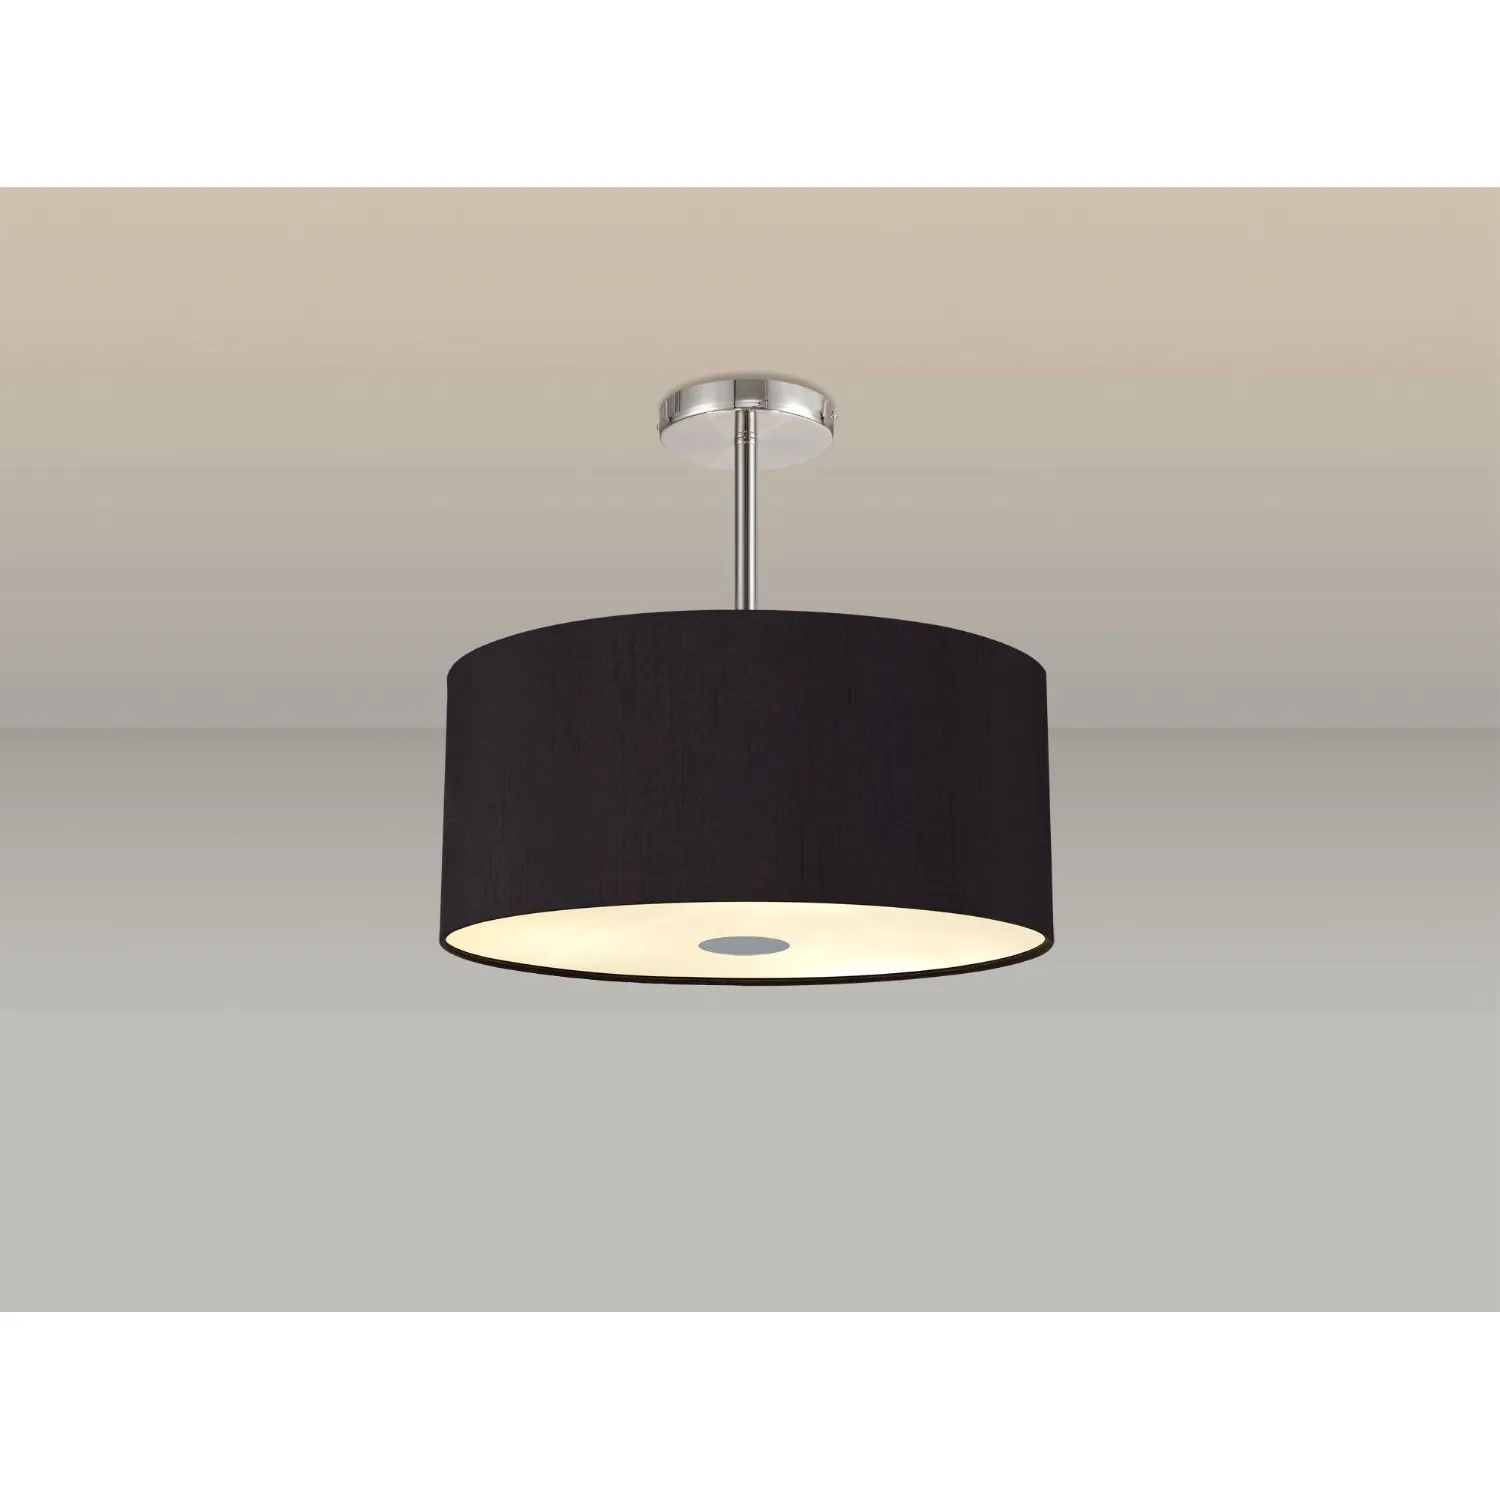 Baymont Polished Chrome 5 Light E27 Semi Flush c w 400mm Dual Faux Silk Shade, Black Green Olive And 400mm Frosted PC Acrylic Diffuser